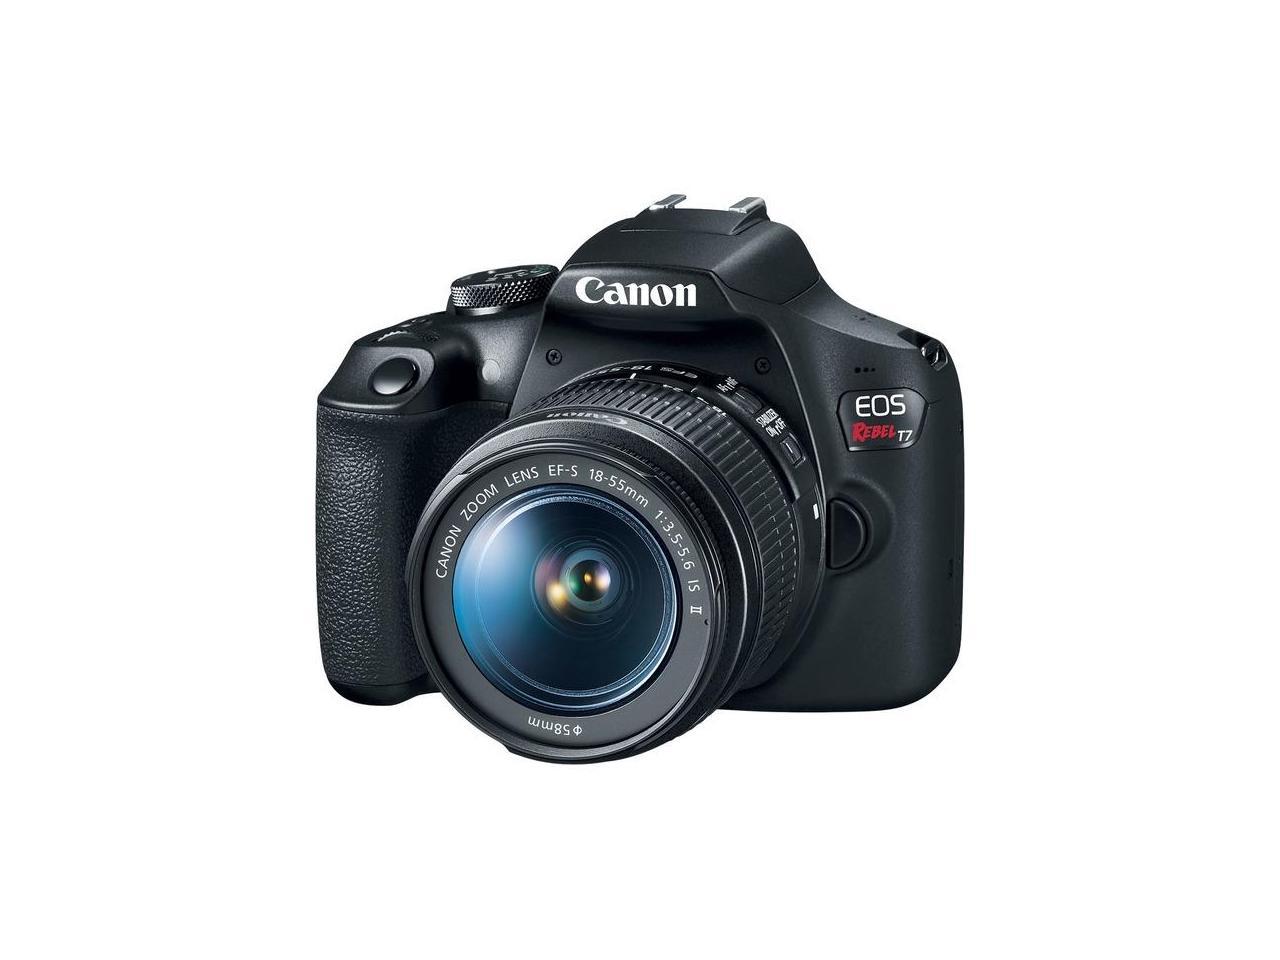 Canon EOS Rebel T7 EF18-55mm + EF 75-300mm Double Zoom KIT T7 EF18-55mm + EF 75-300mm Double Zoom KIT - image 1 of 20